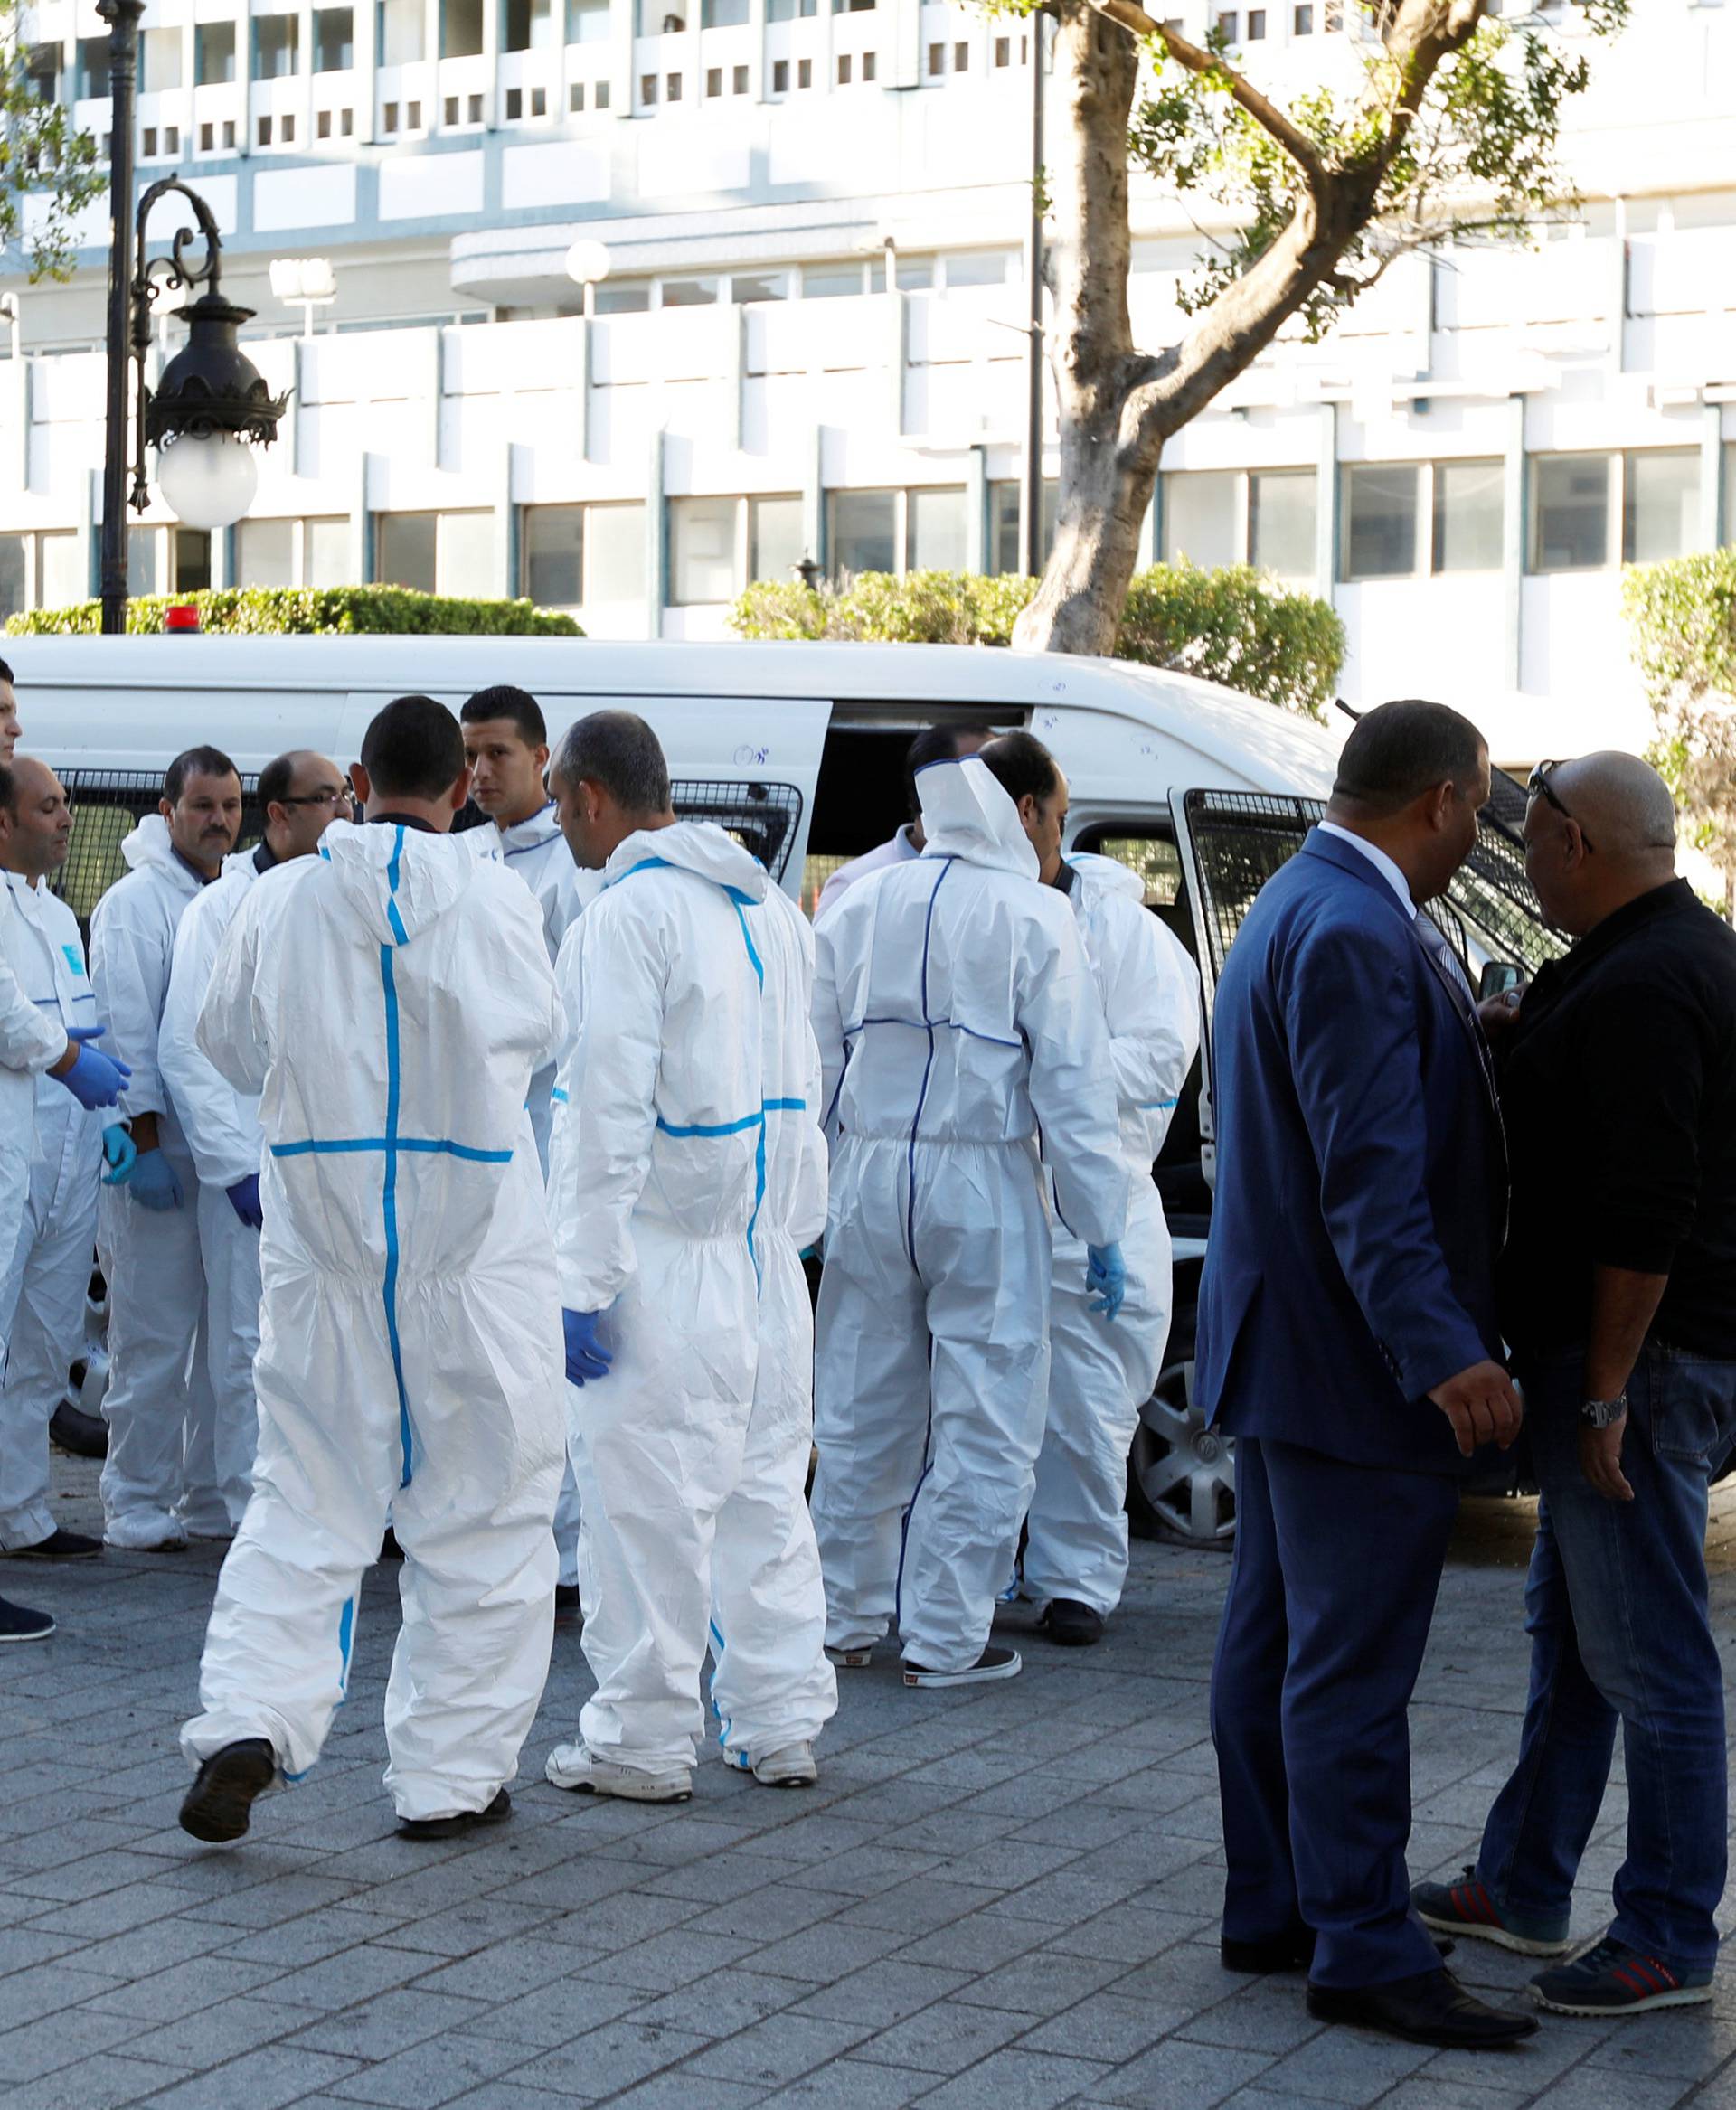 Forensic experts work near the site of an explosion in the center of the Tunisian capital Tunis